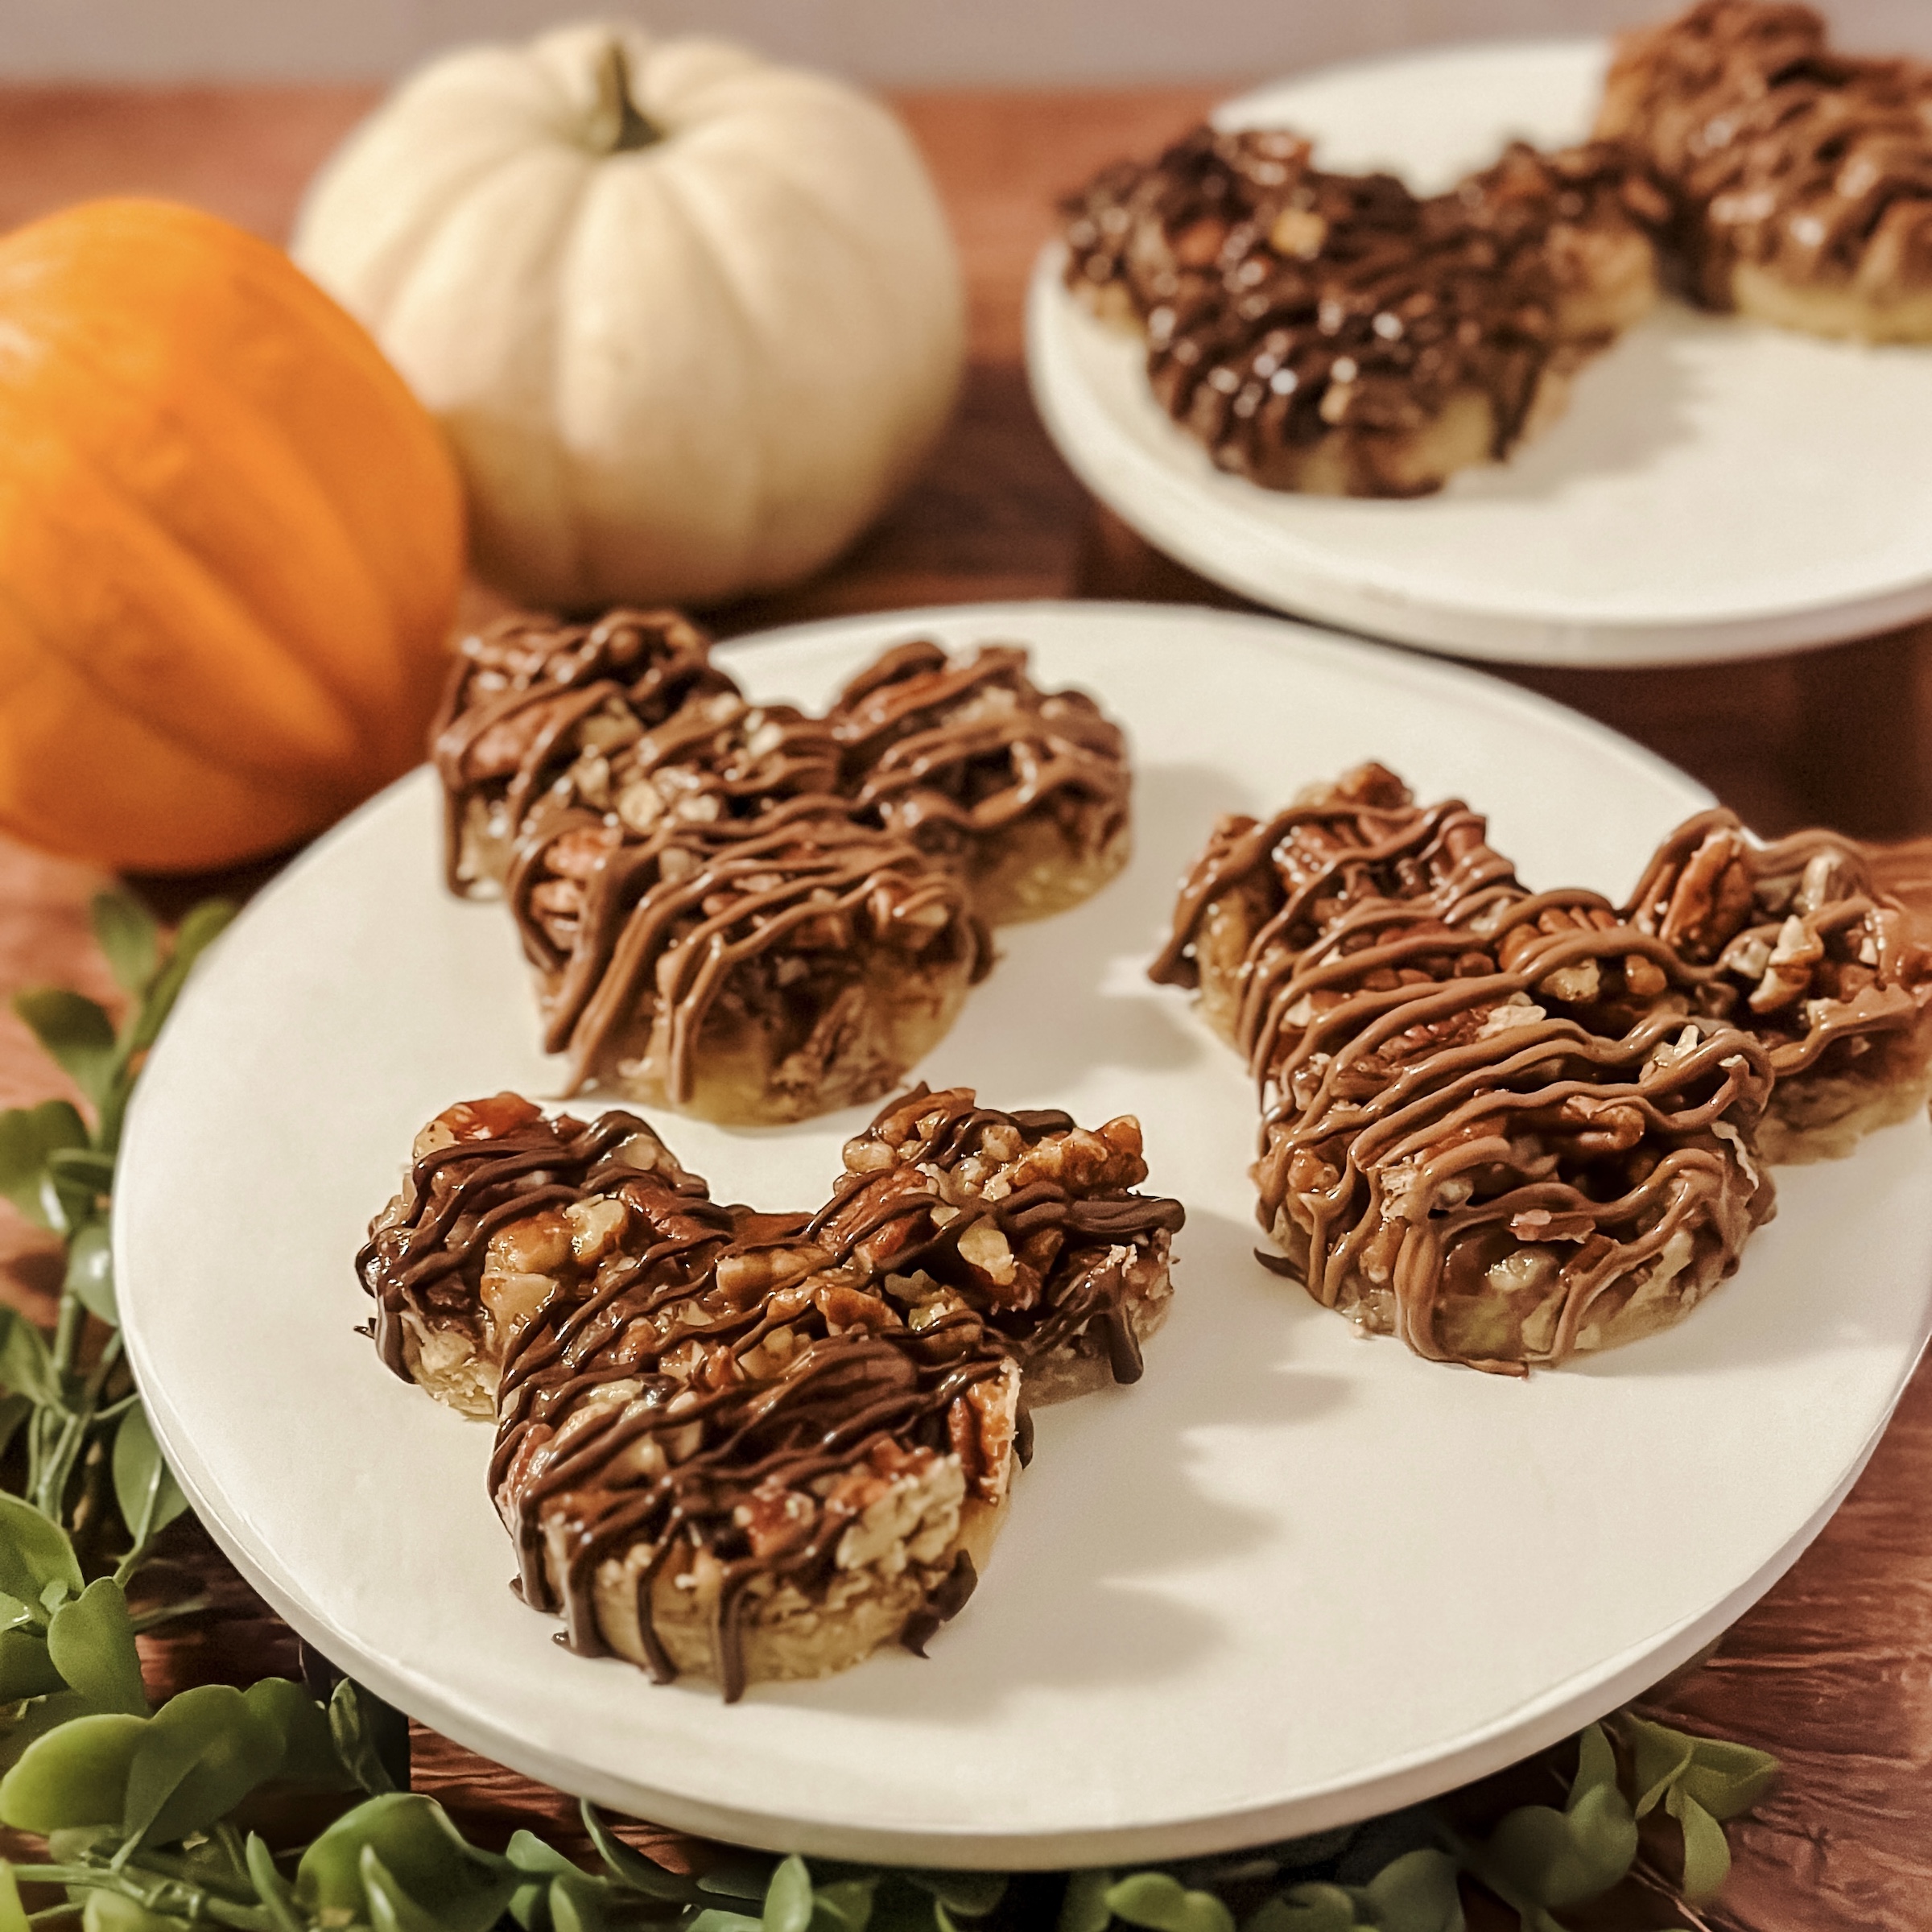 Mickey's Chocolate Pecan Bars (Mickey shaped pecan bars with a chocolate drizzle)